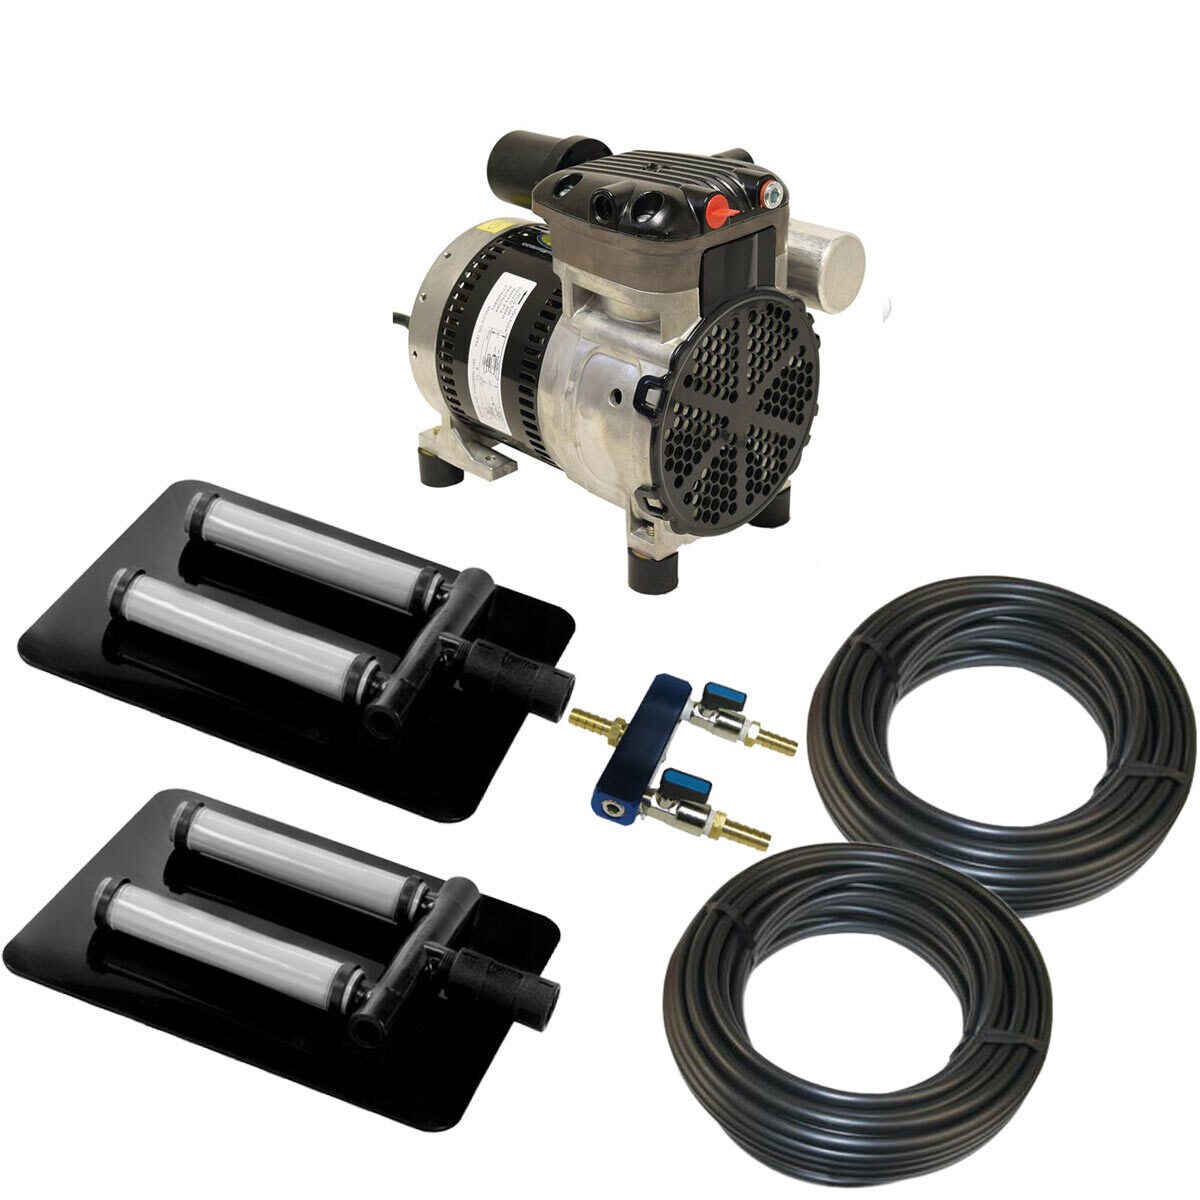 1/4 HP Deep Water Aeration Kit With 2 Diffusers for Ponds up to 2 Acres